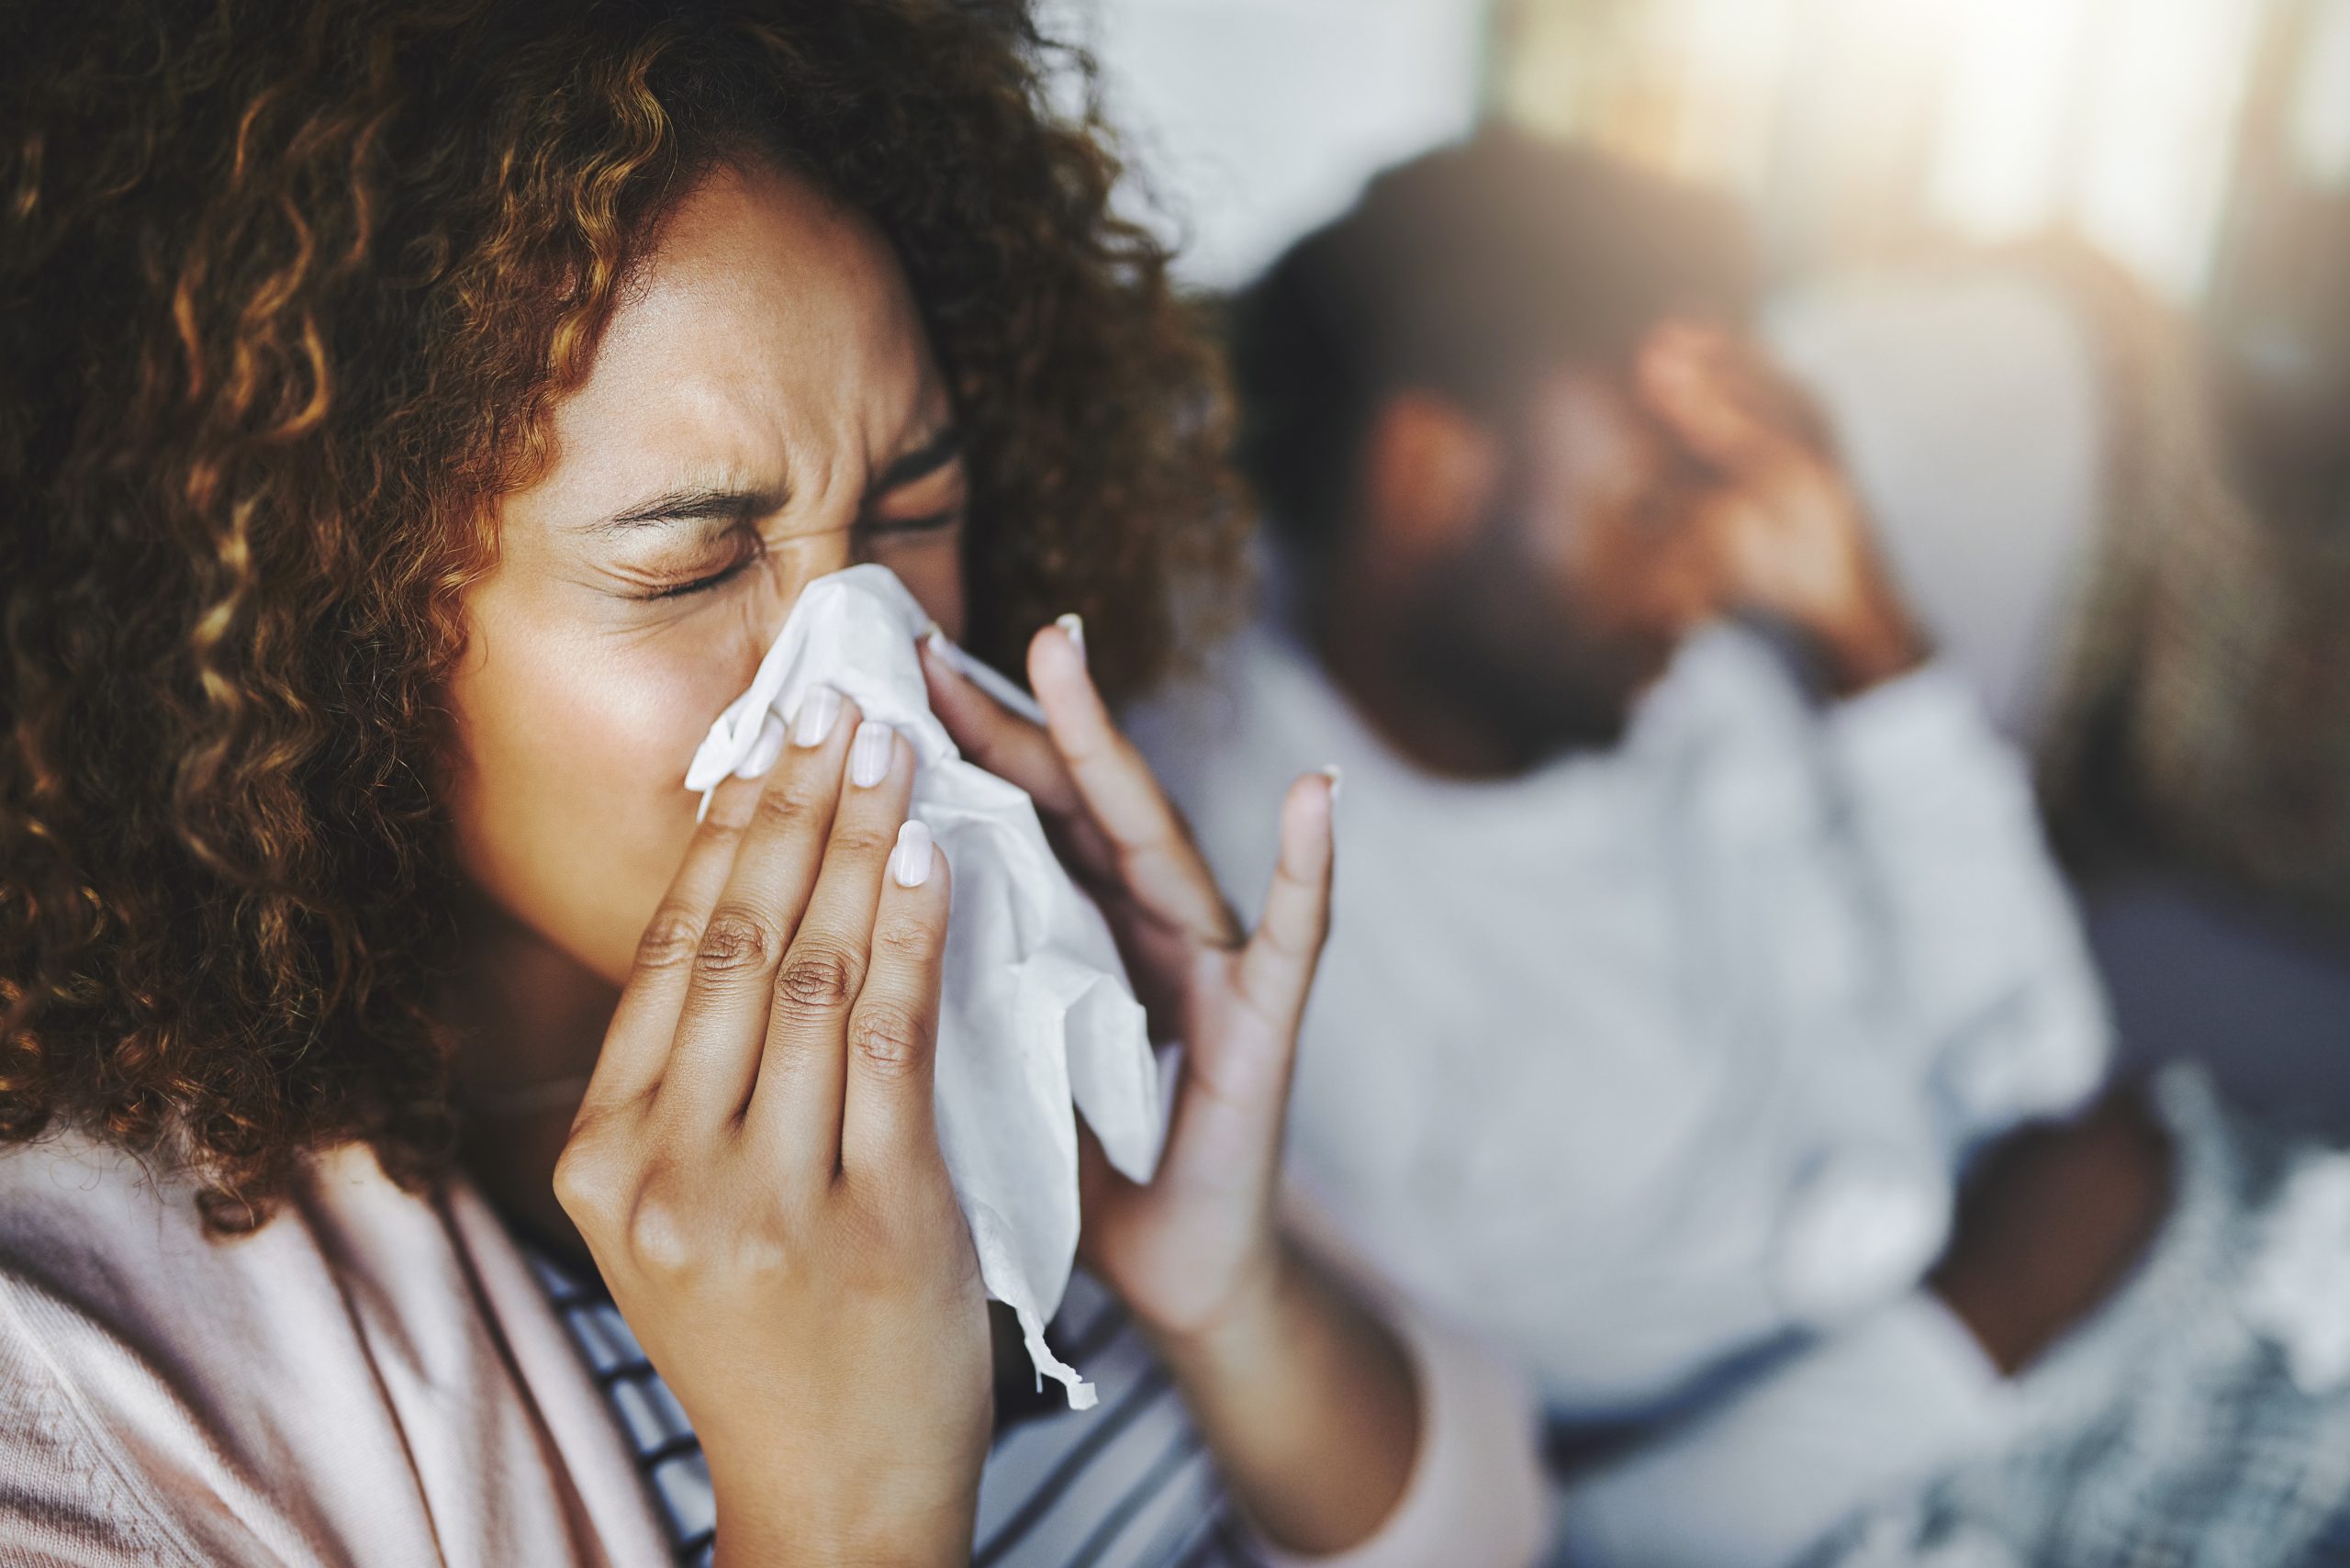 Can you clean homes with specific allergies or sensitivities in mind?